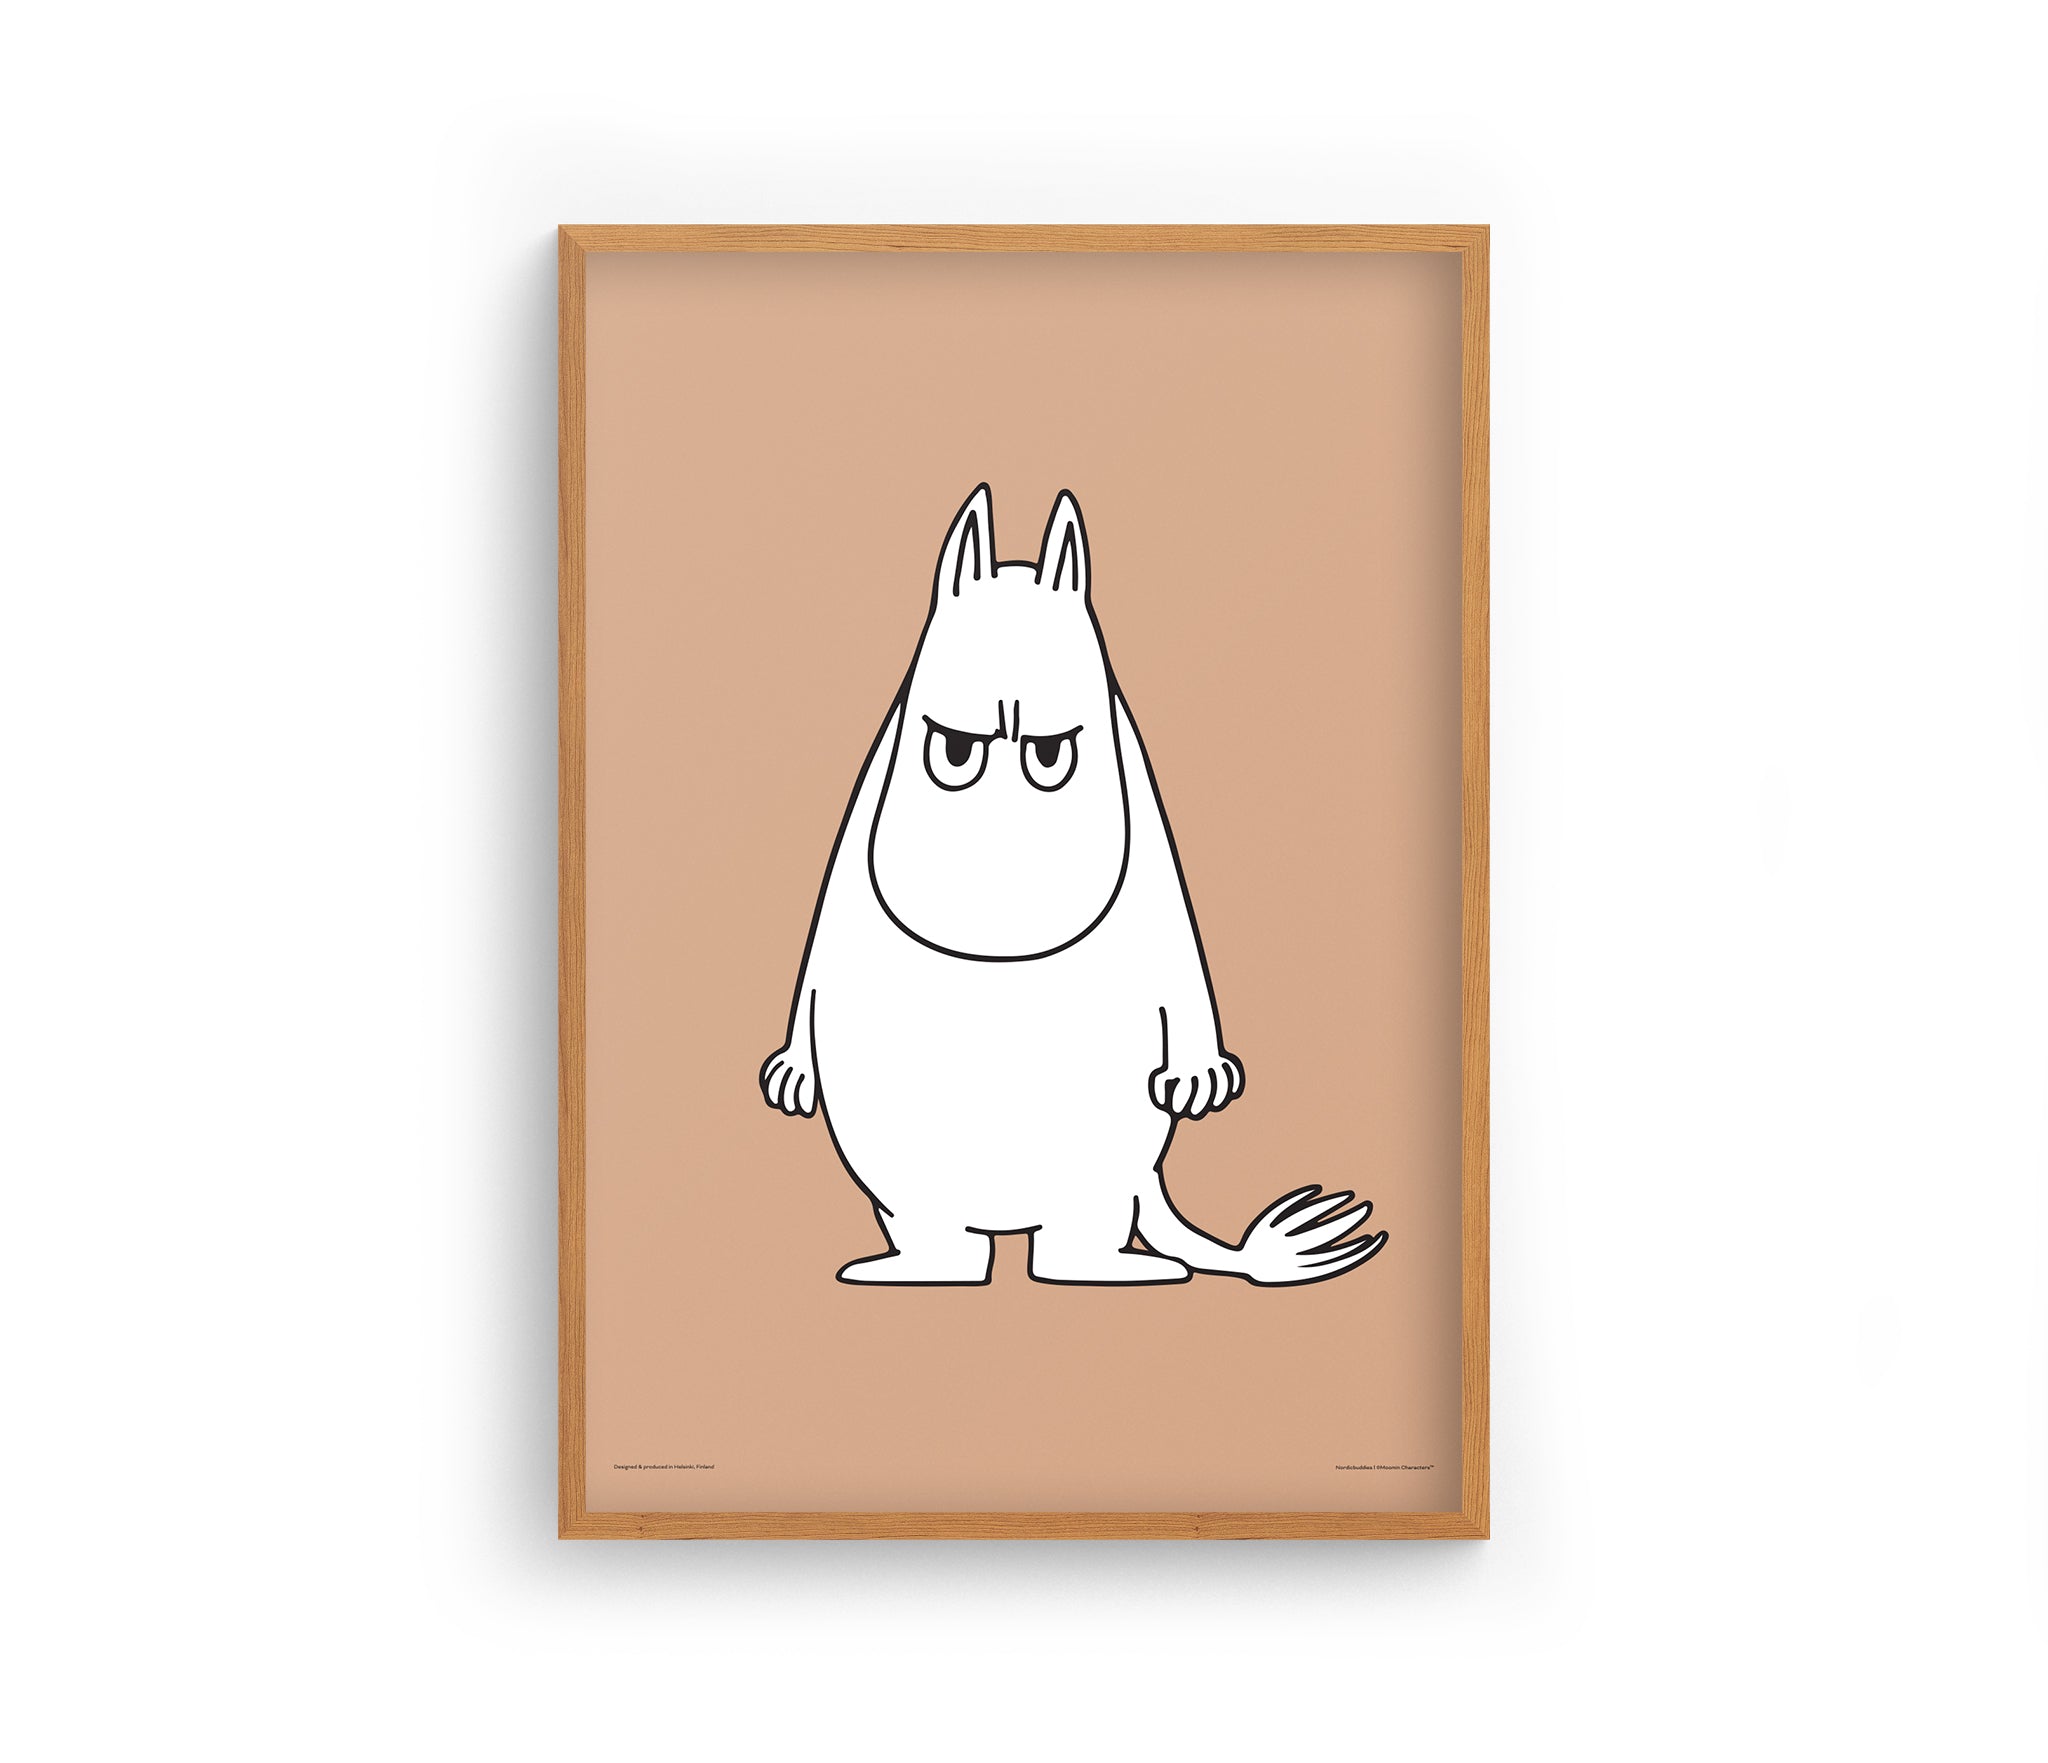 Moomintroll Angry Poster 30x40cm - Beige